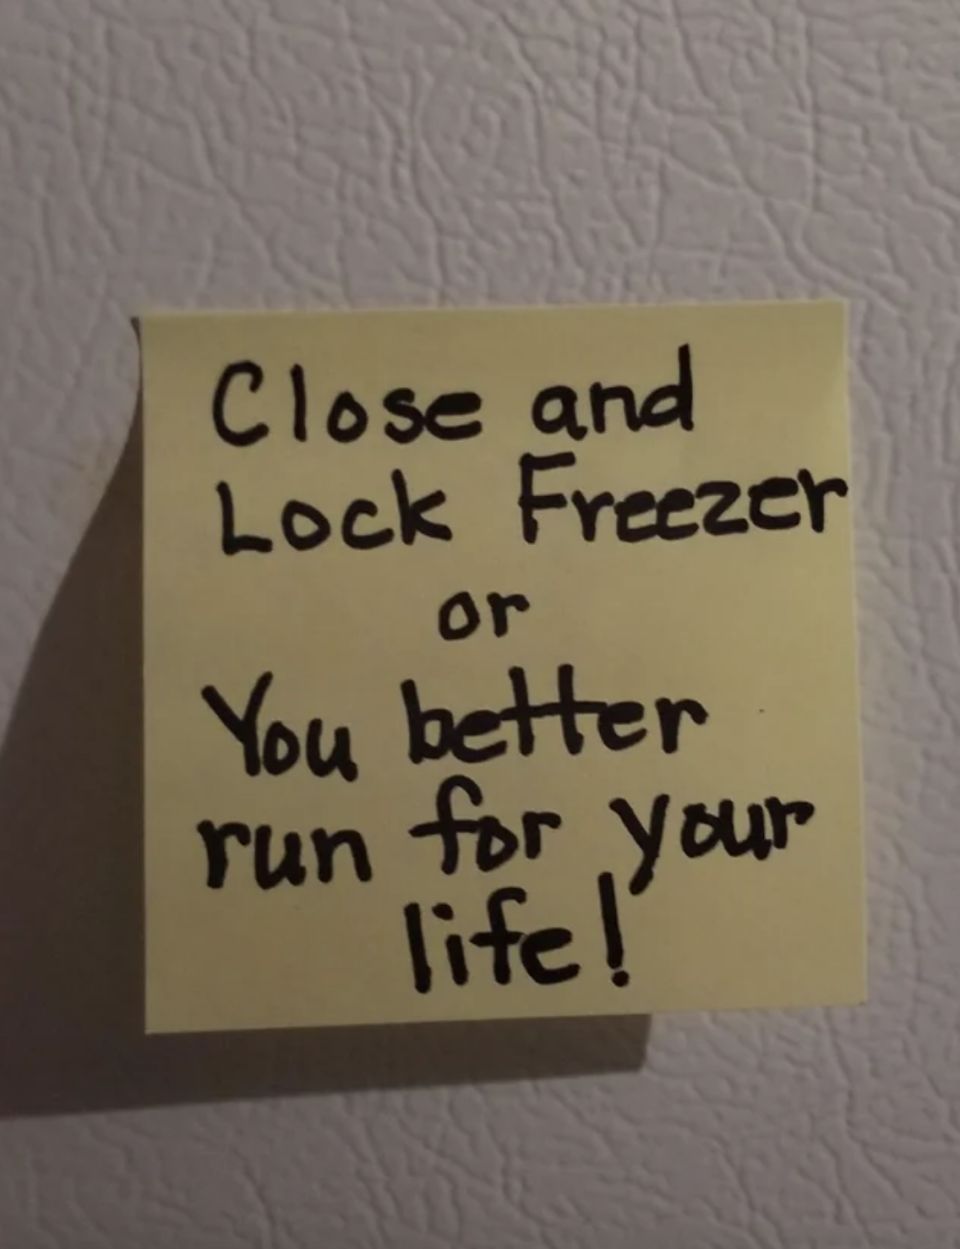 "Close and lock freezer or you better run for your life!"